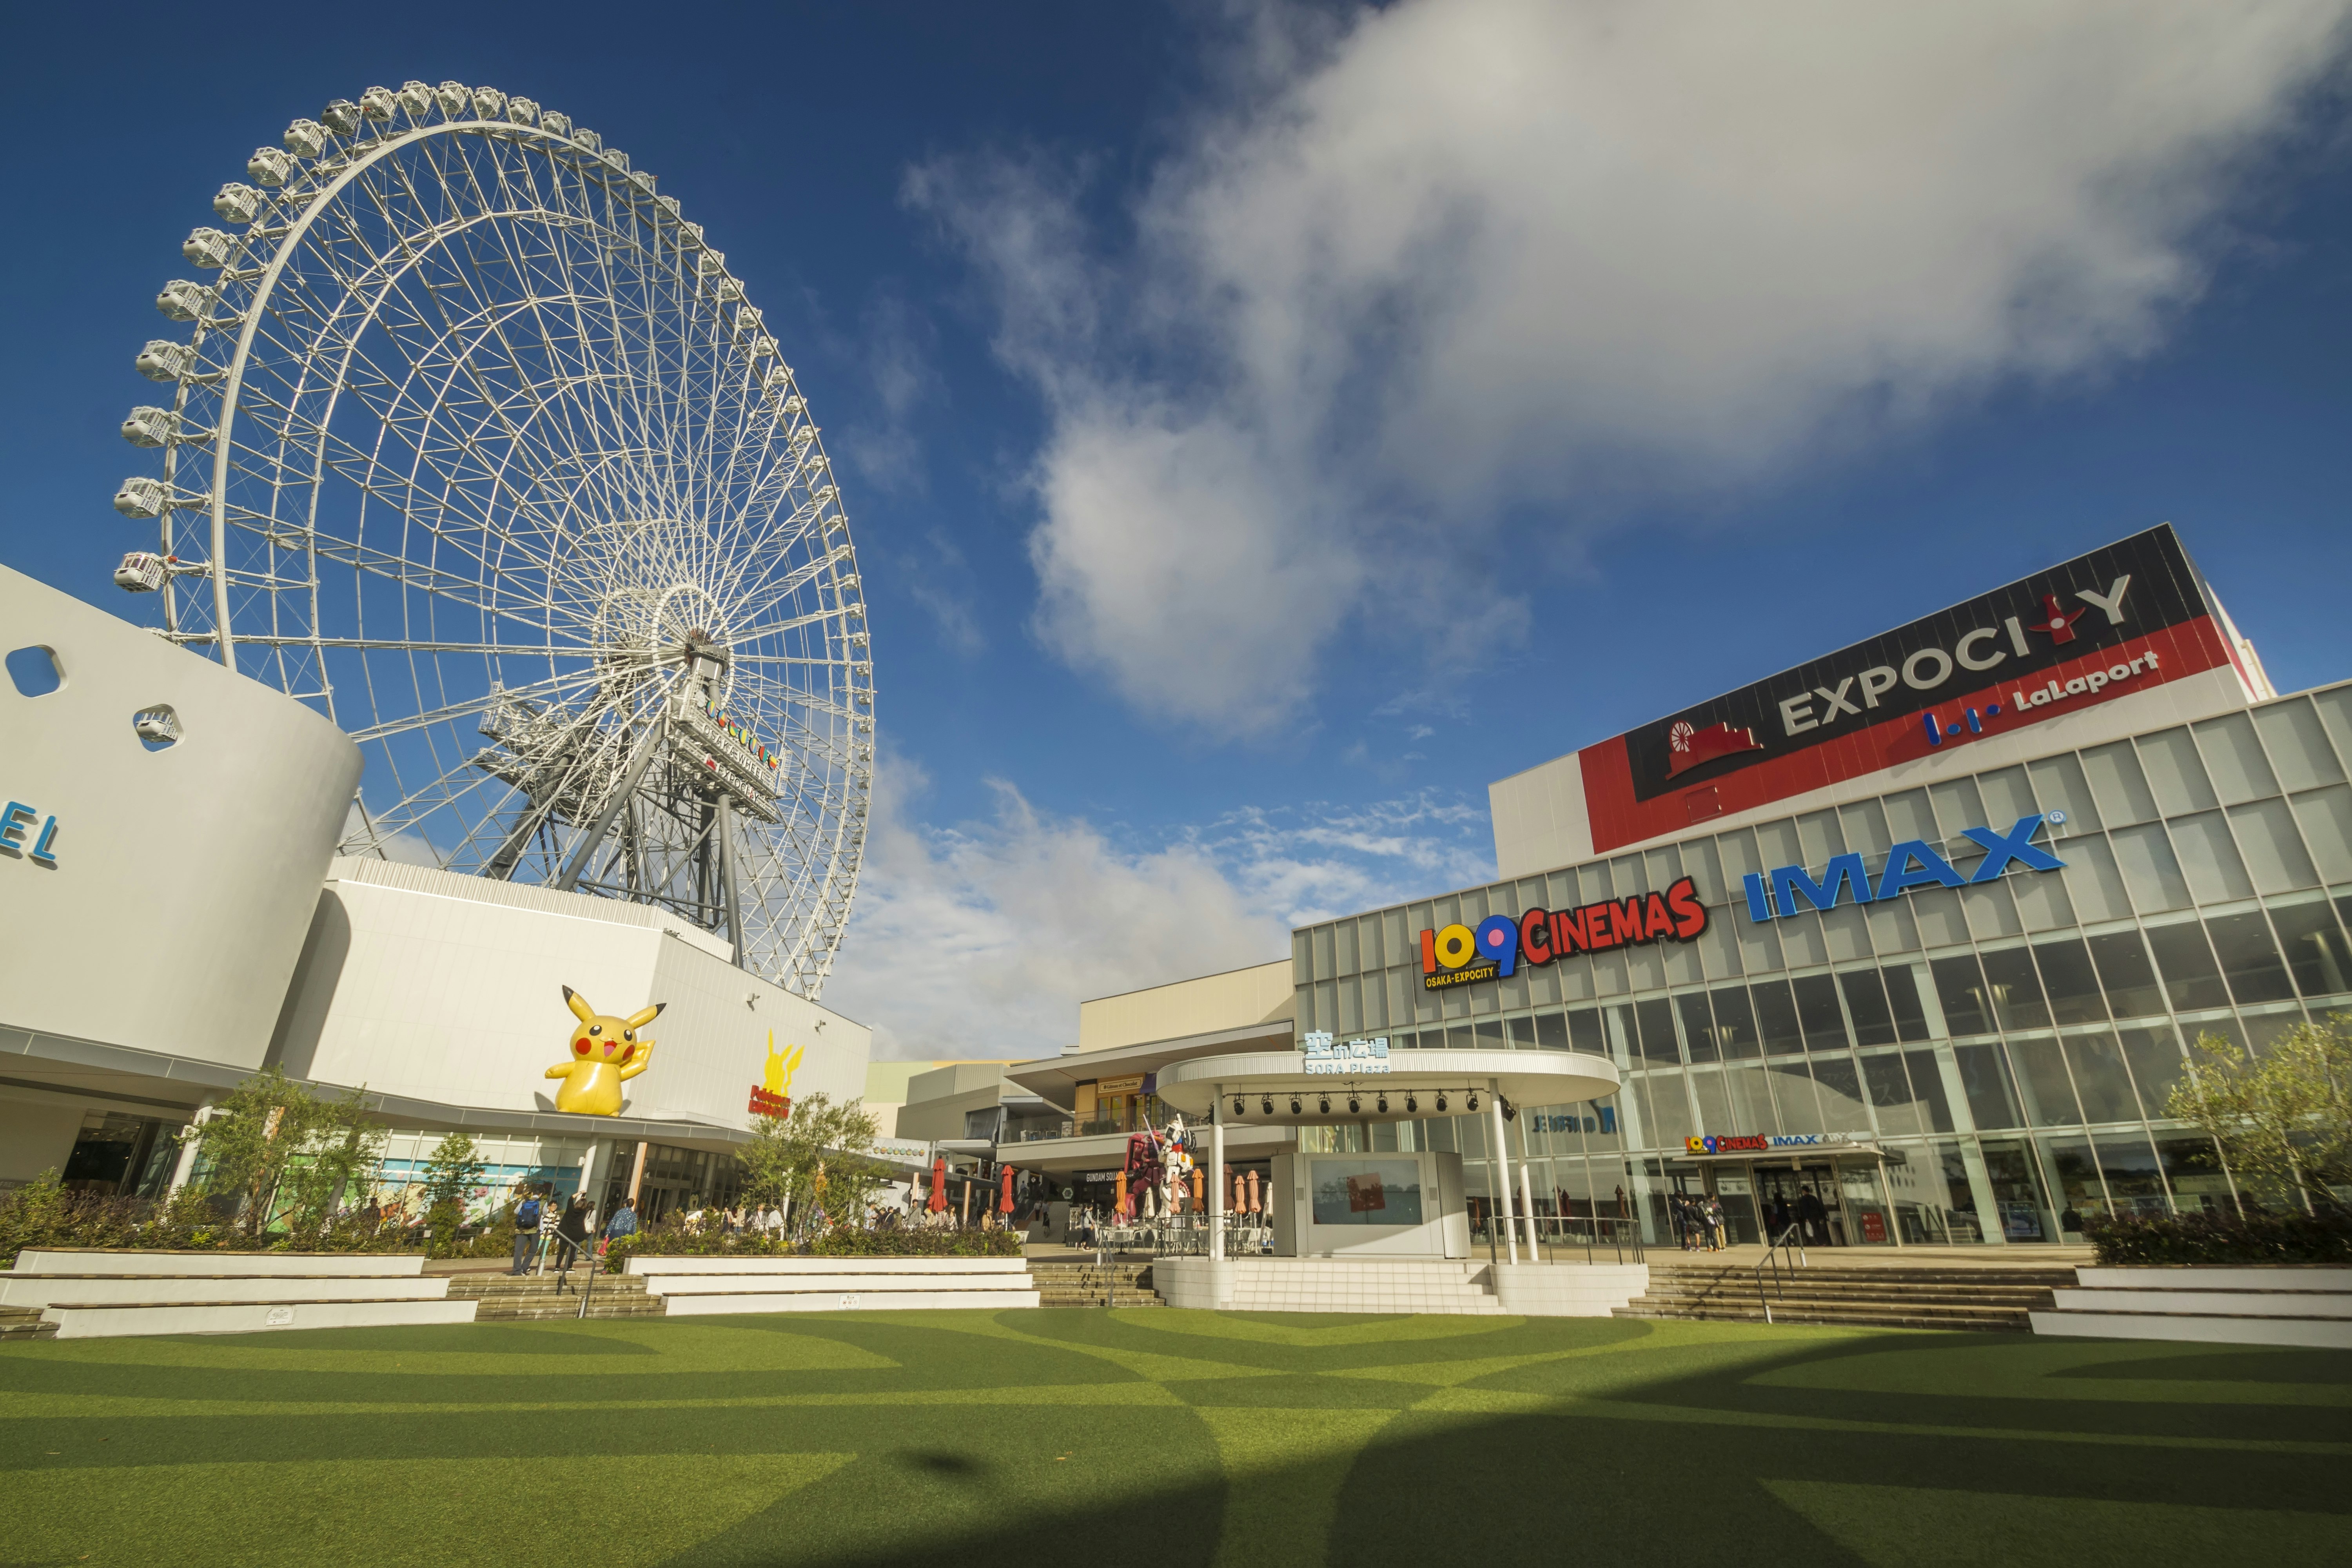 A large entertainment and shopping complex with a Ferris wheel in the background